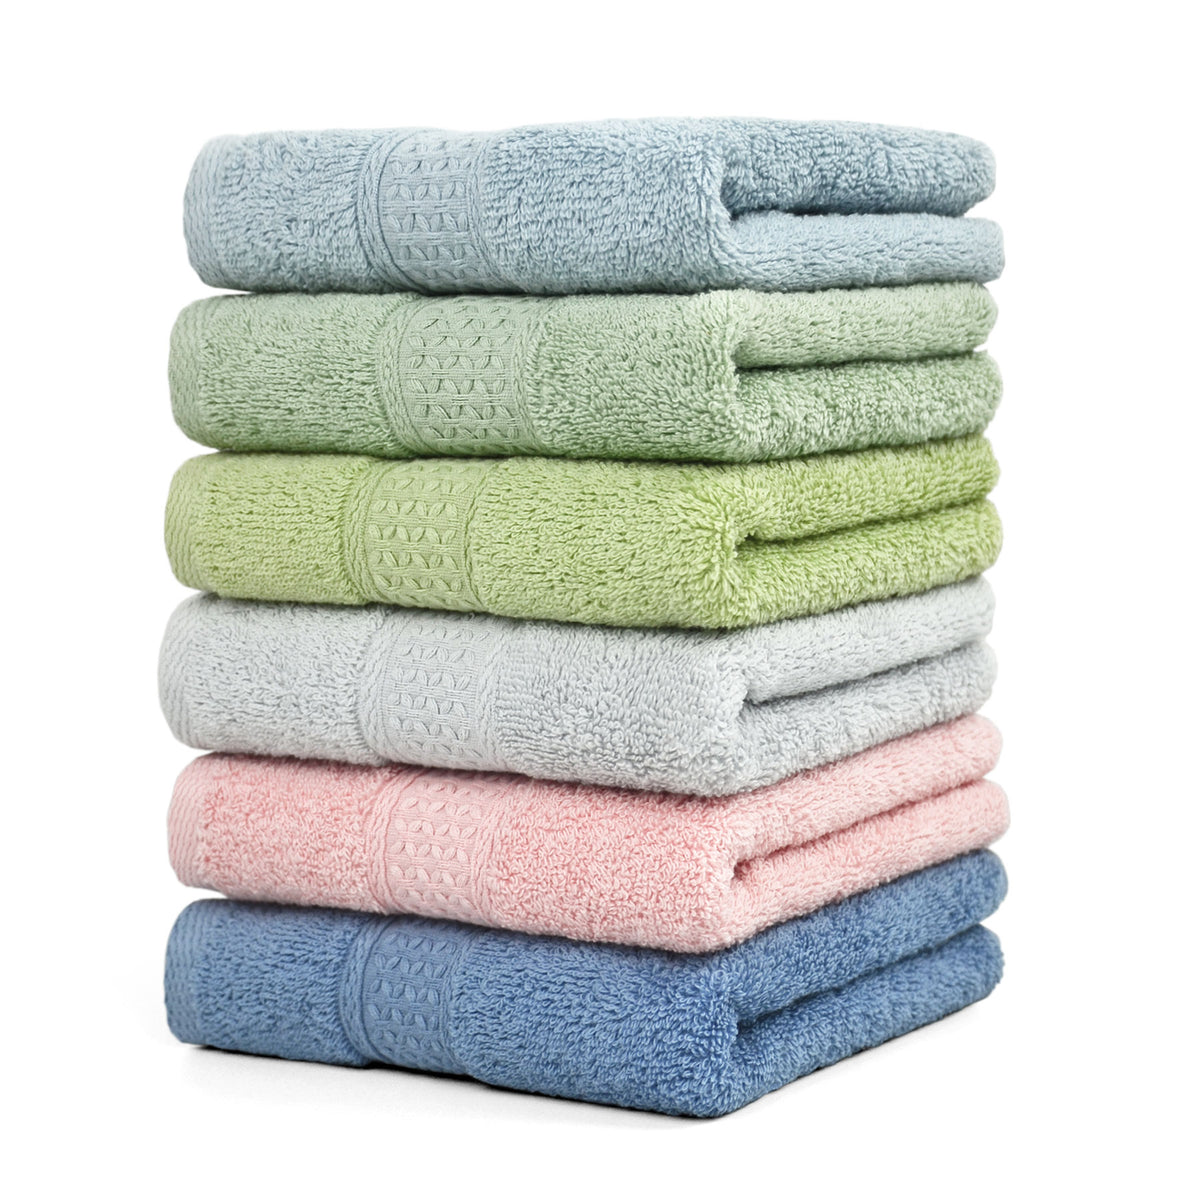 Cleanbear Hand Towels for Bathroom Hand Towel Set of 6 in Assorted Colors,  Wavy Line Design for Bathroom Decoration, Soft and Fluffy Bathroom Hand